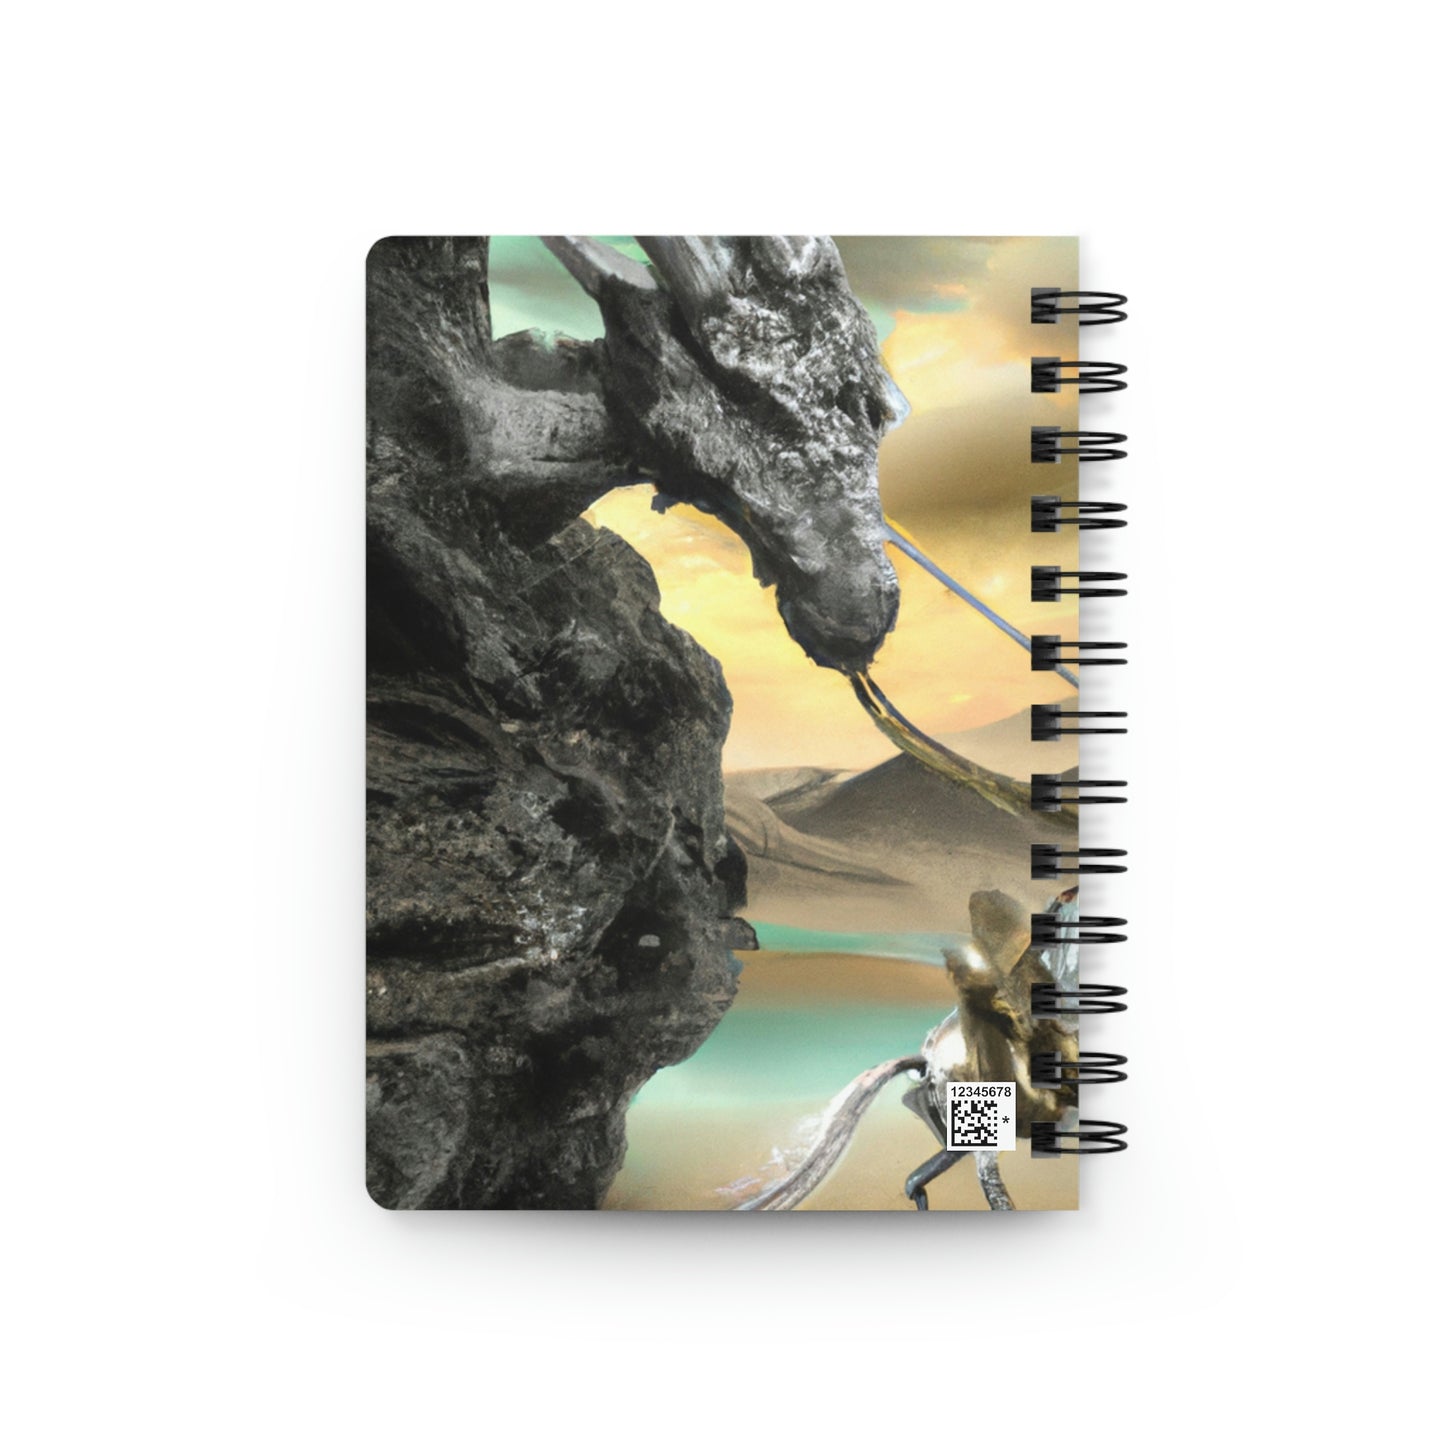 The Knight and the Dragon's Throne - The Alien Spiral Bound Journal